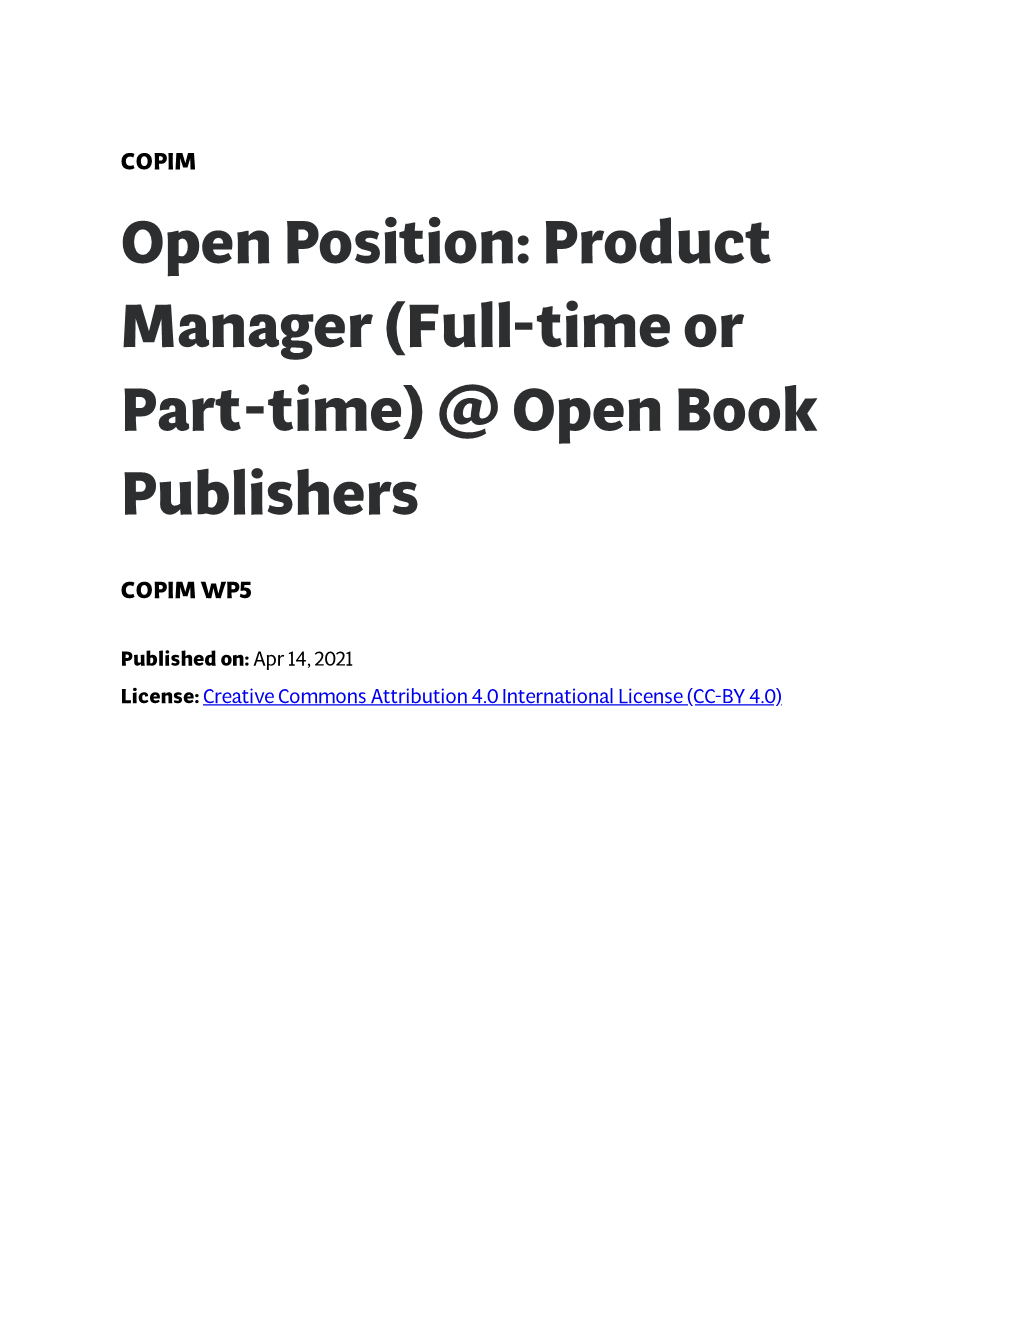 Open Position: Product Manager (Full-Time Or Part-Time) @ Open Book Publishers